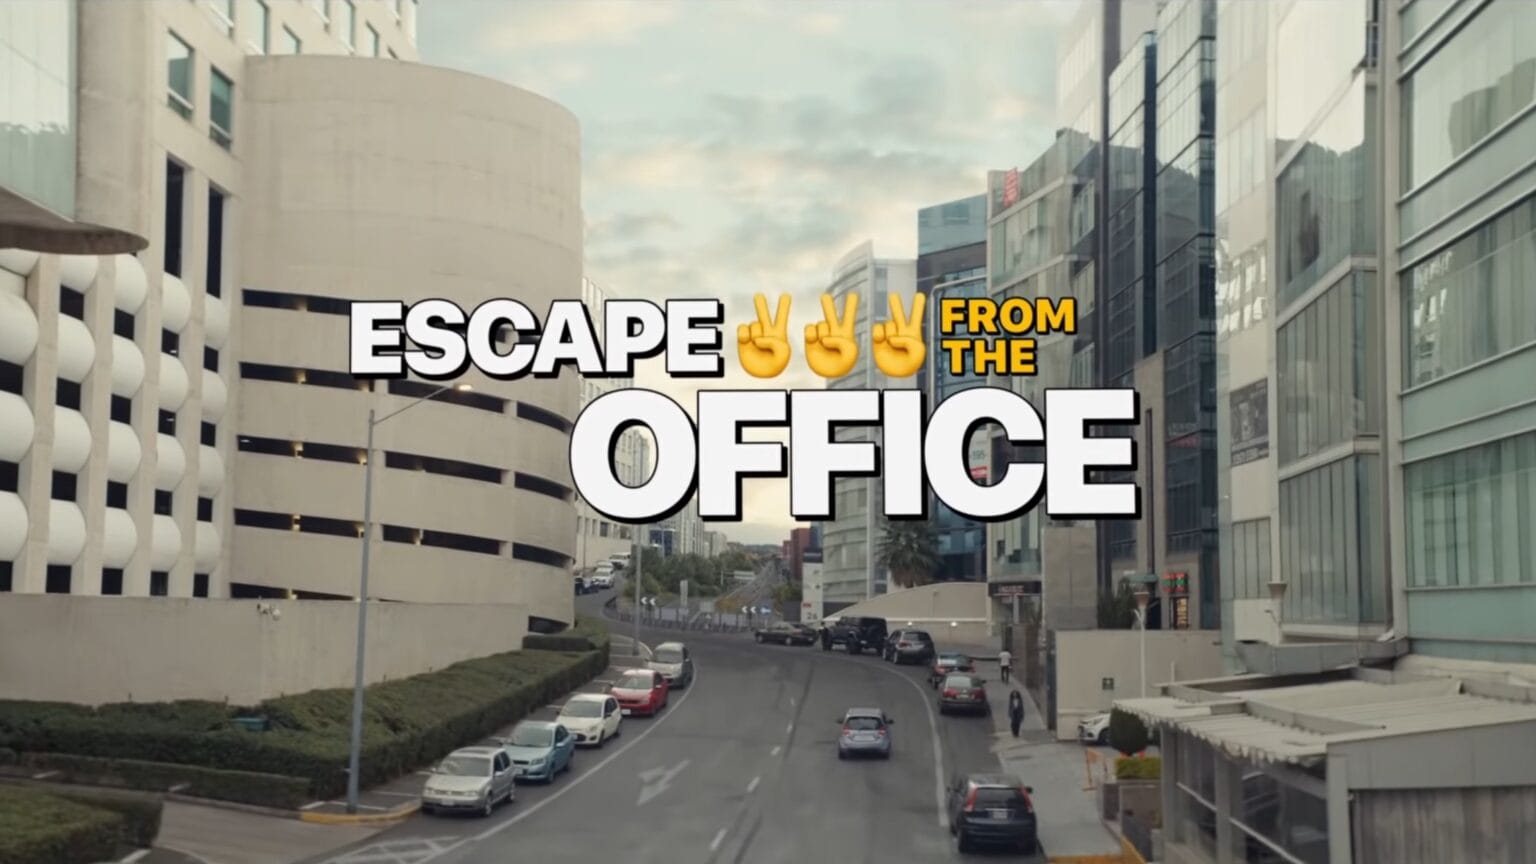 Apple’s clever 'Escape from the Office' ad hits YouTube top 10